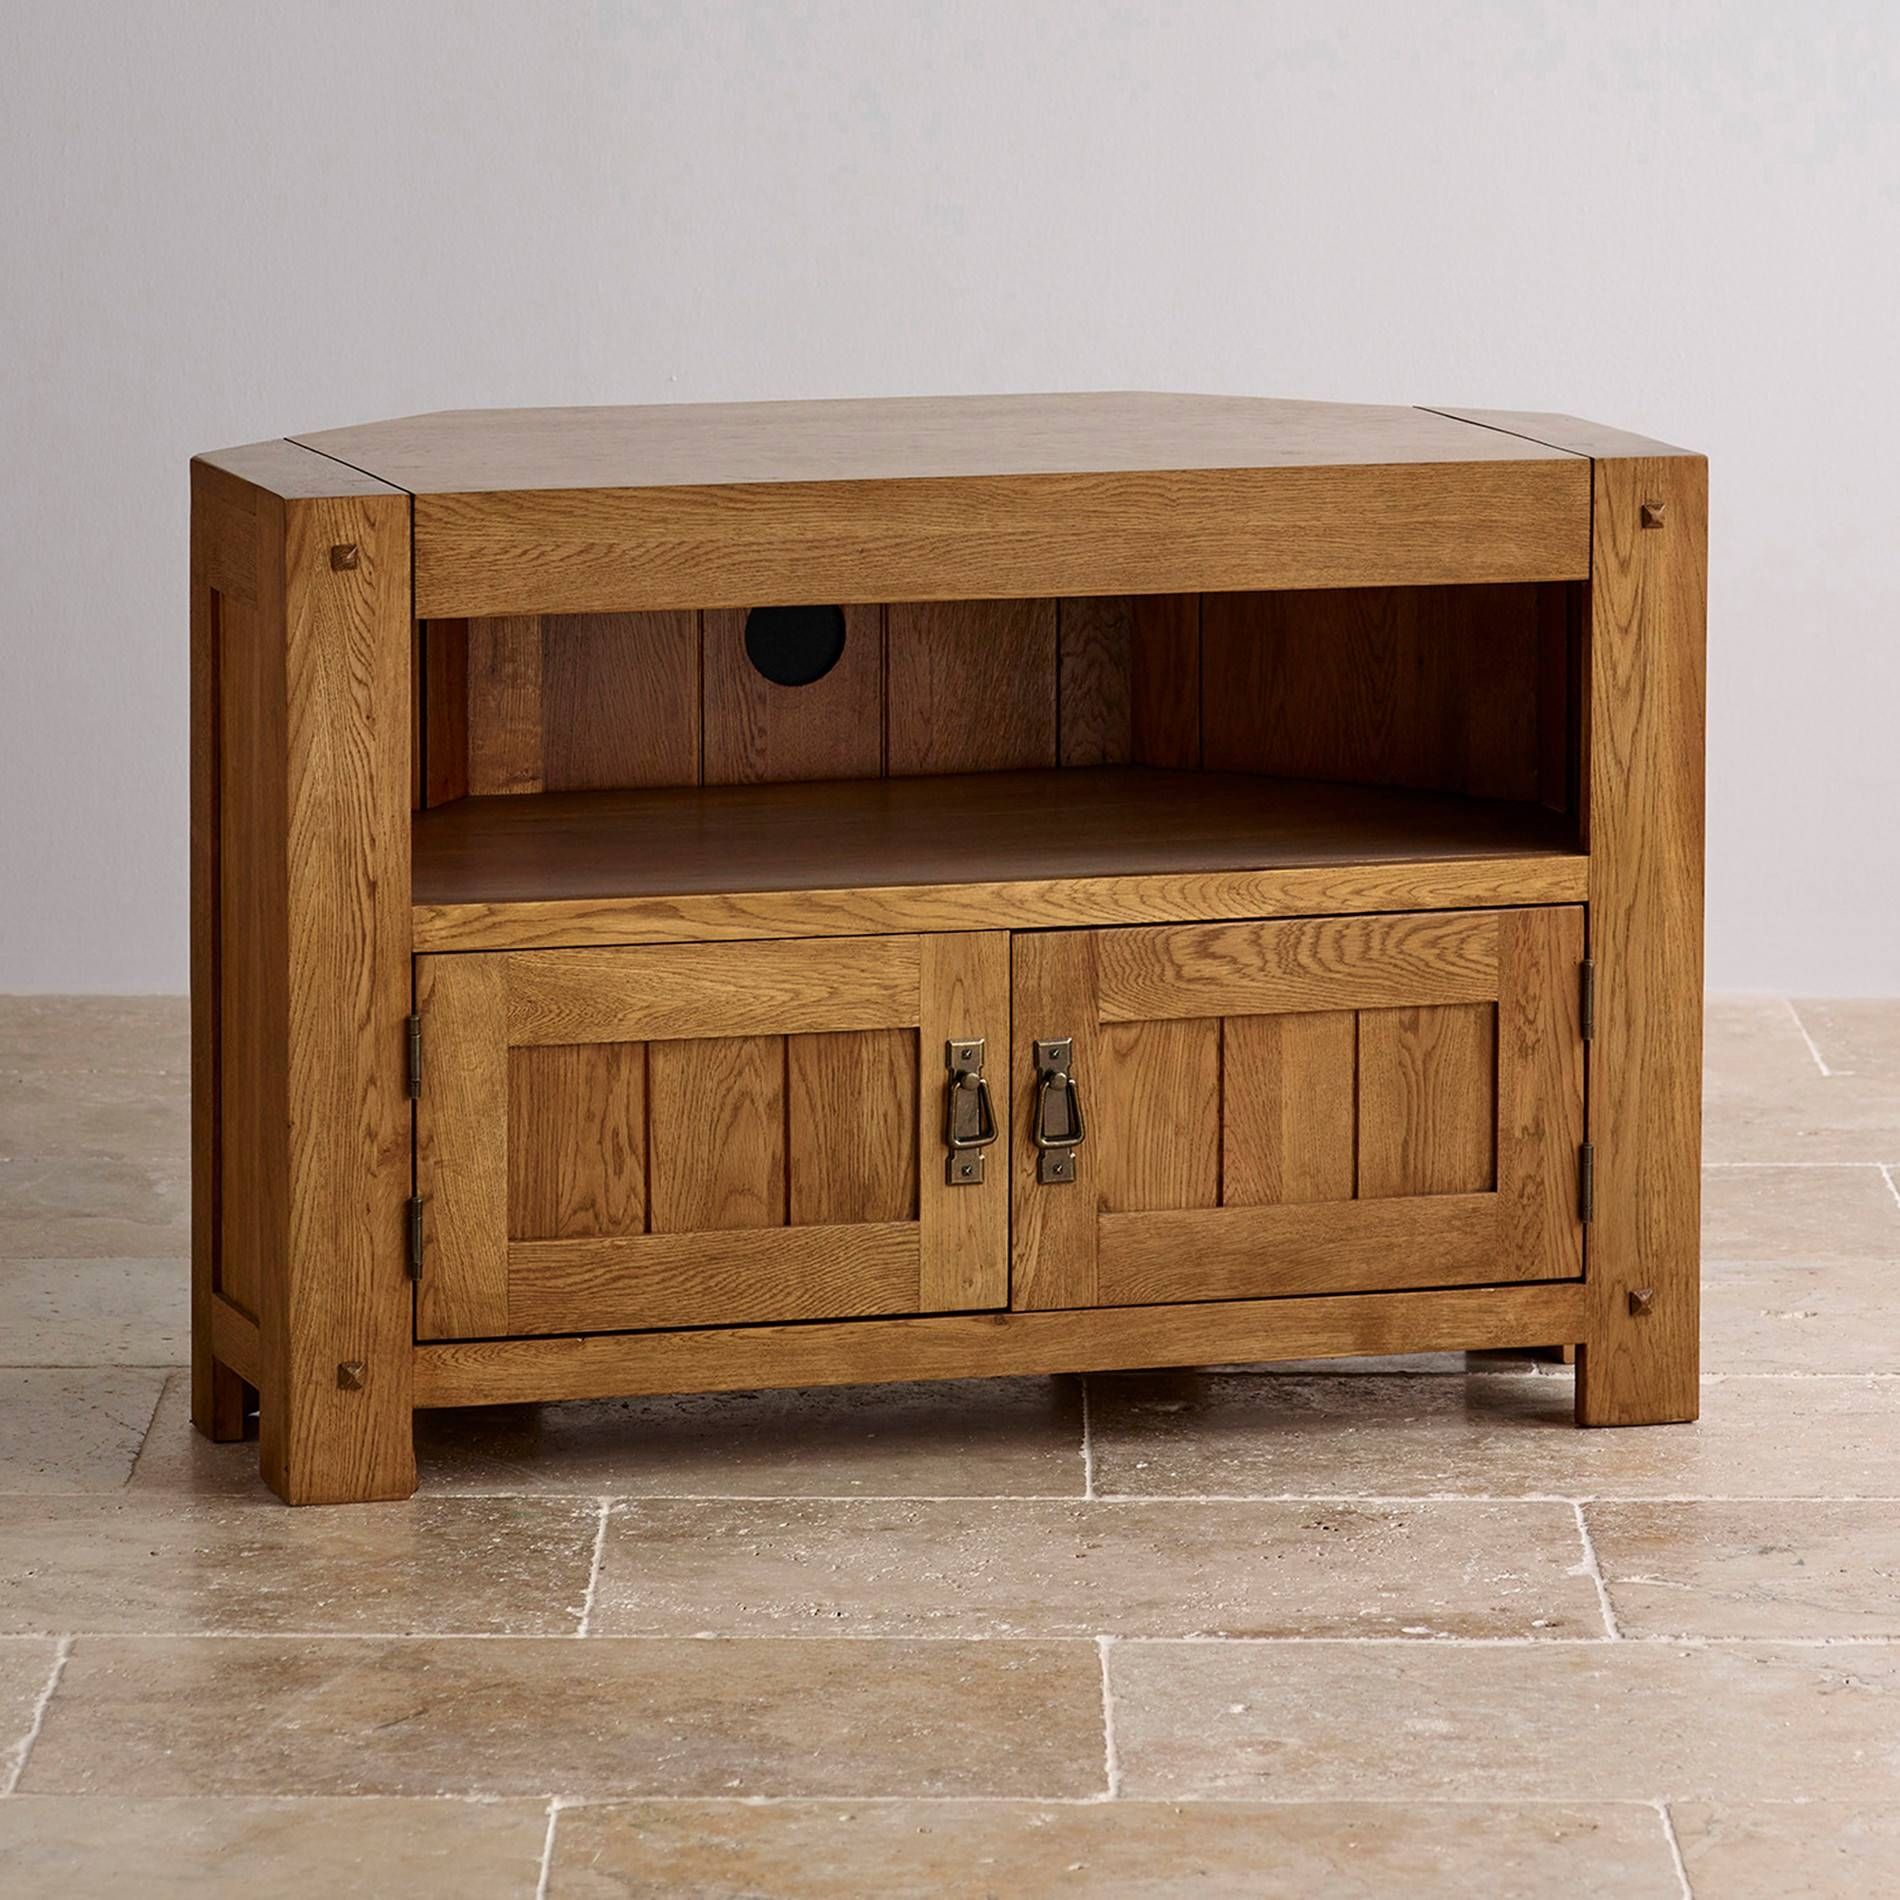 Quercus Corner Tv Cabinet In Rustic Oak | Oak Furniture Land Intended For Wood Corner Tv Cabinets (View 1 of 15)